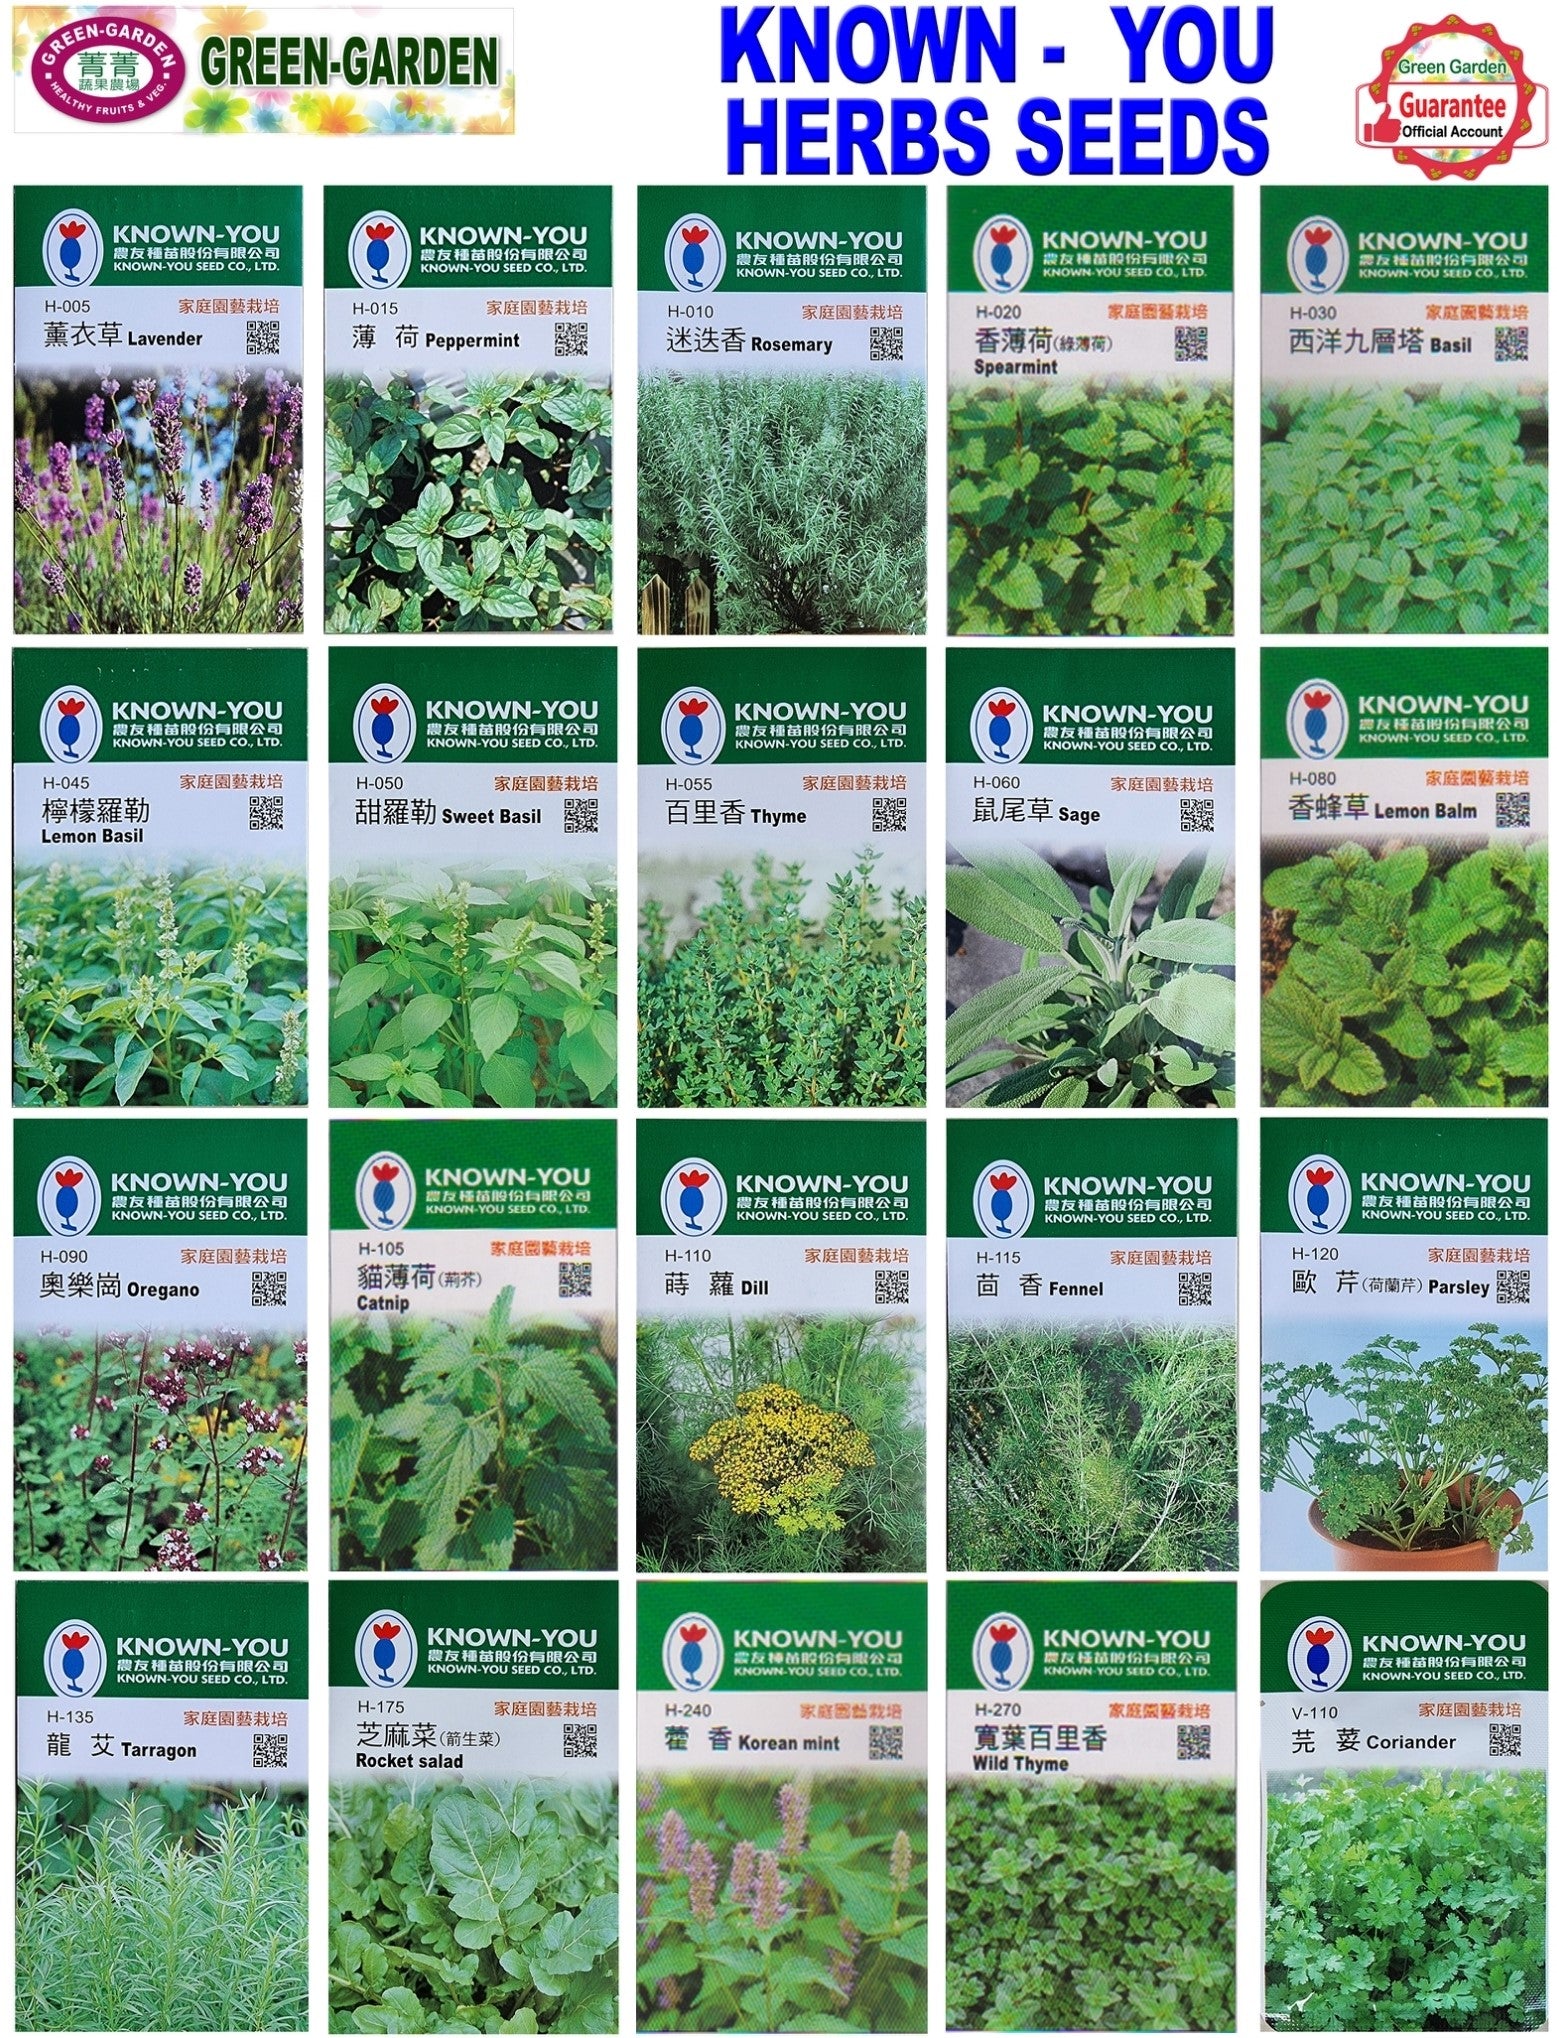 Known You Herbs Seeds (H-005 Lavender)